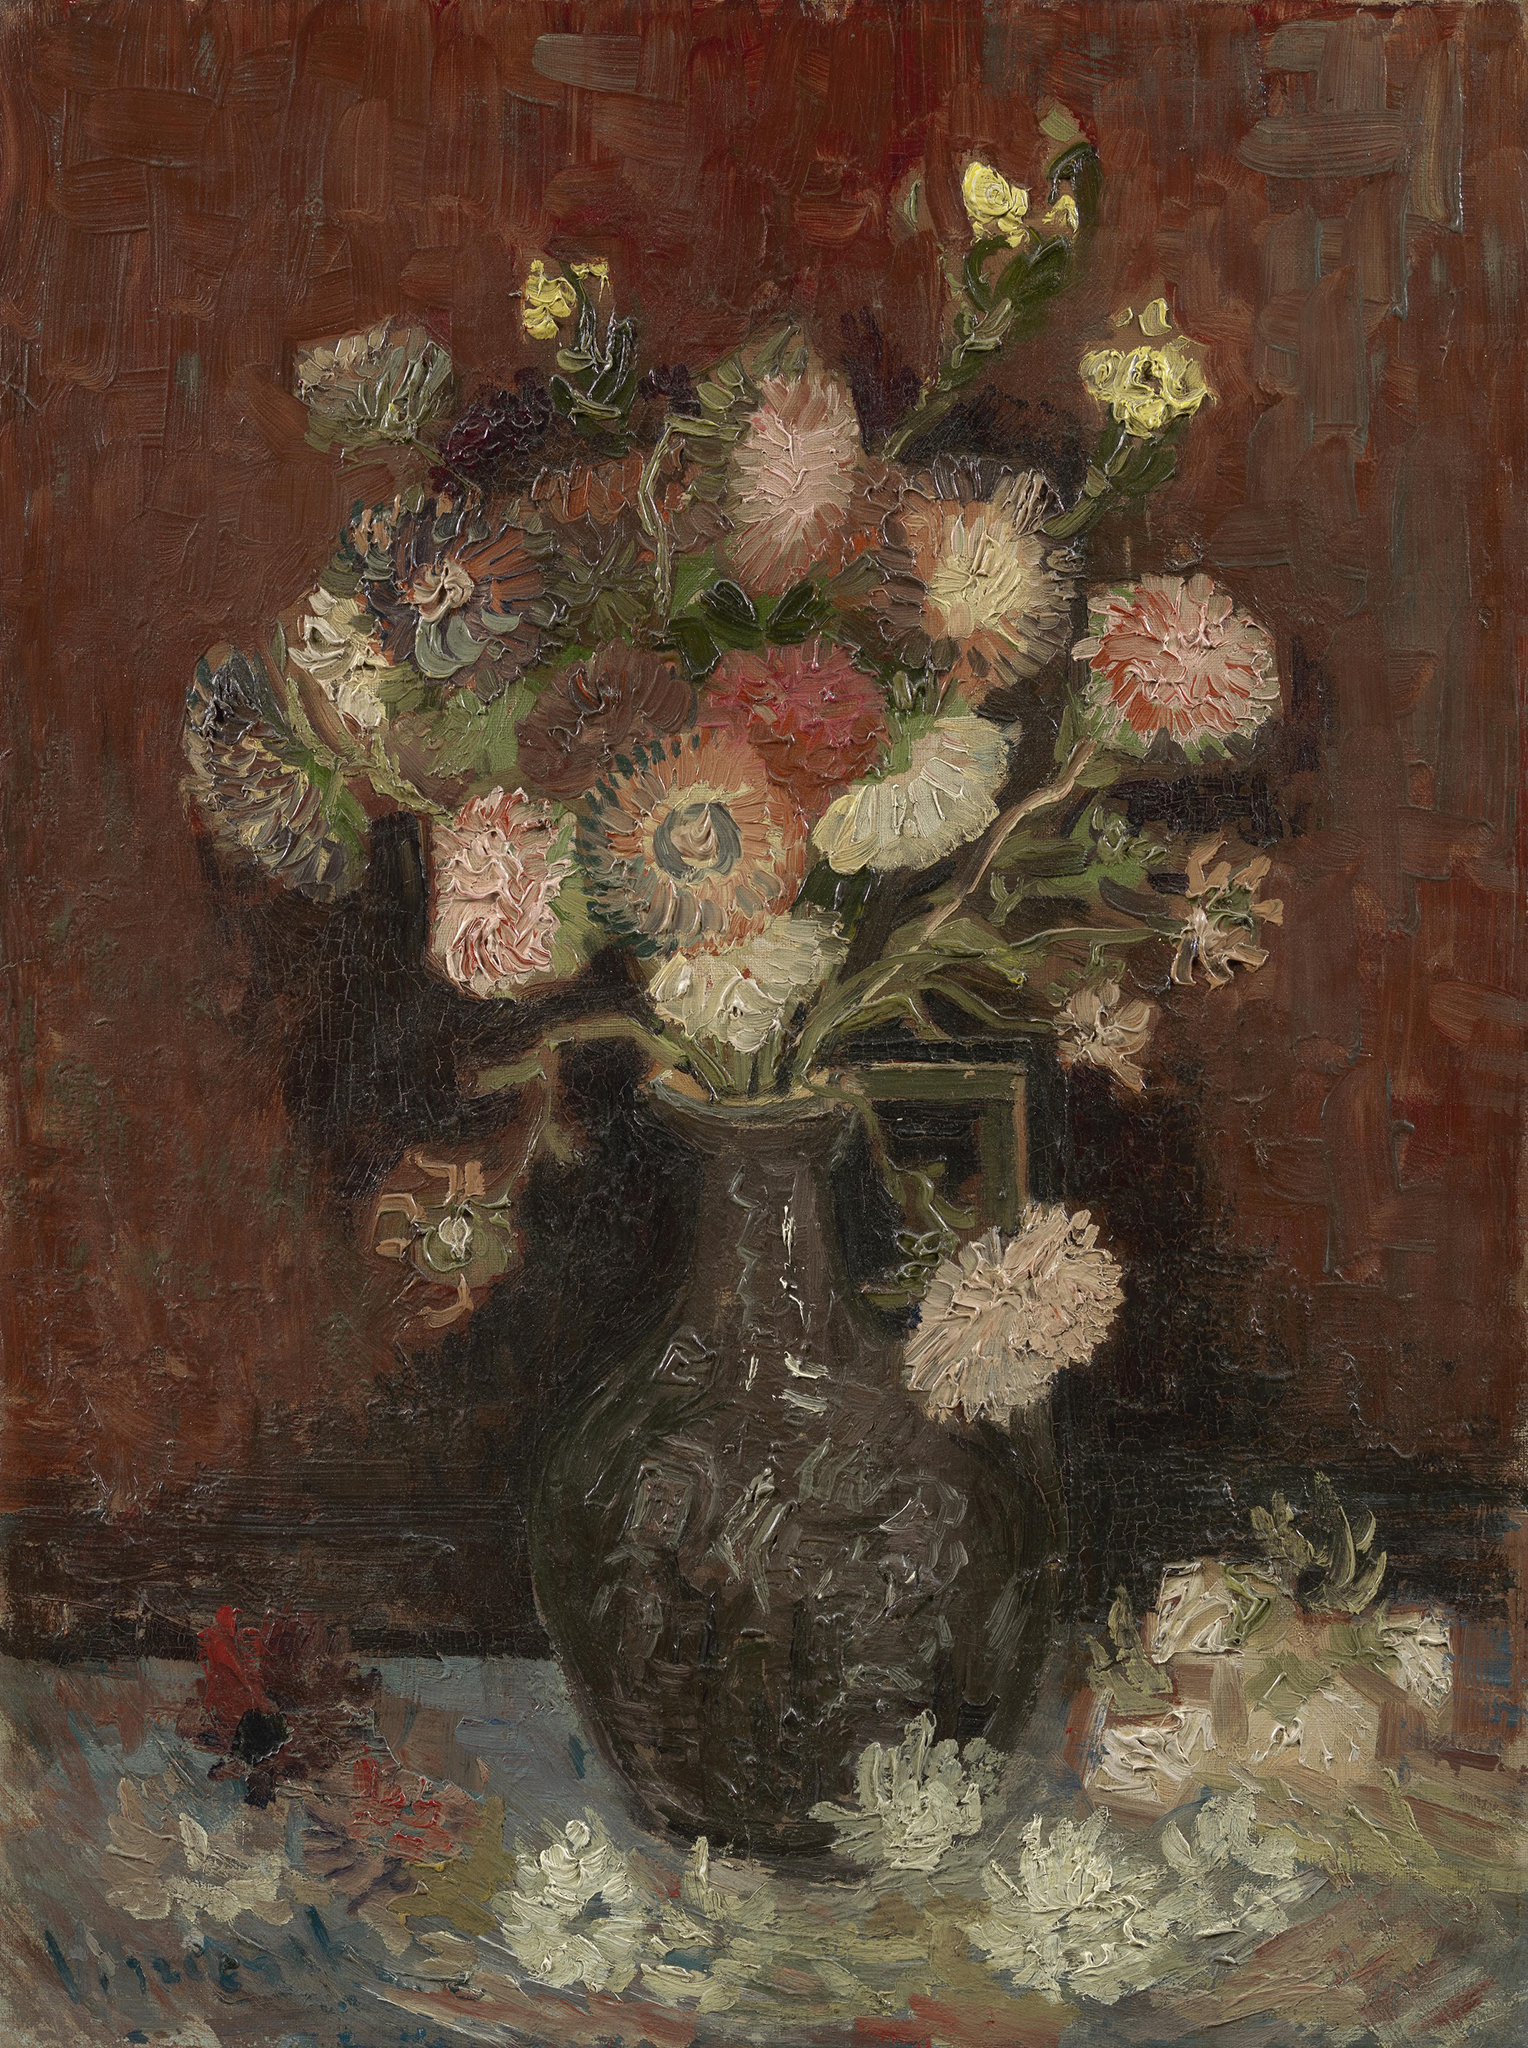 A painting of a flowers in a in a dark brown. The flowers have green stems but the petals rand in colors like pink, white, red, and yellow. Some flowers are wilted over and lay next to the vase on the ground. The background is a dark red wall.